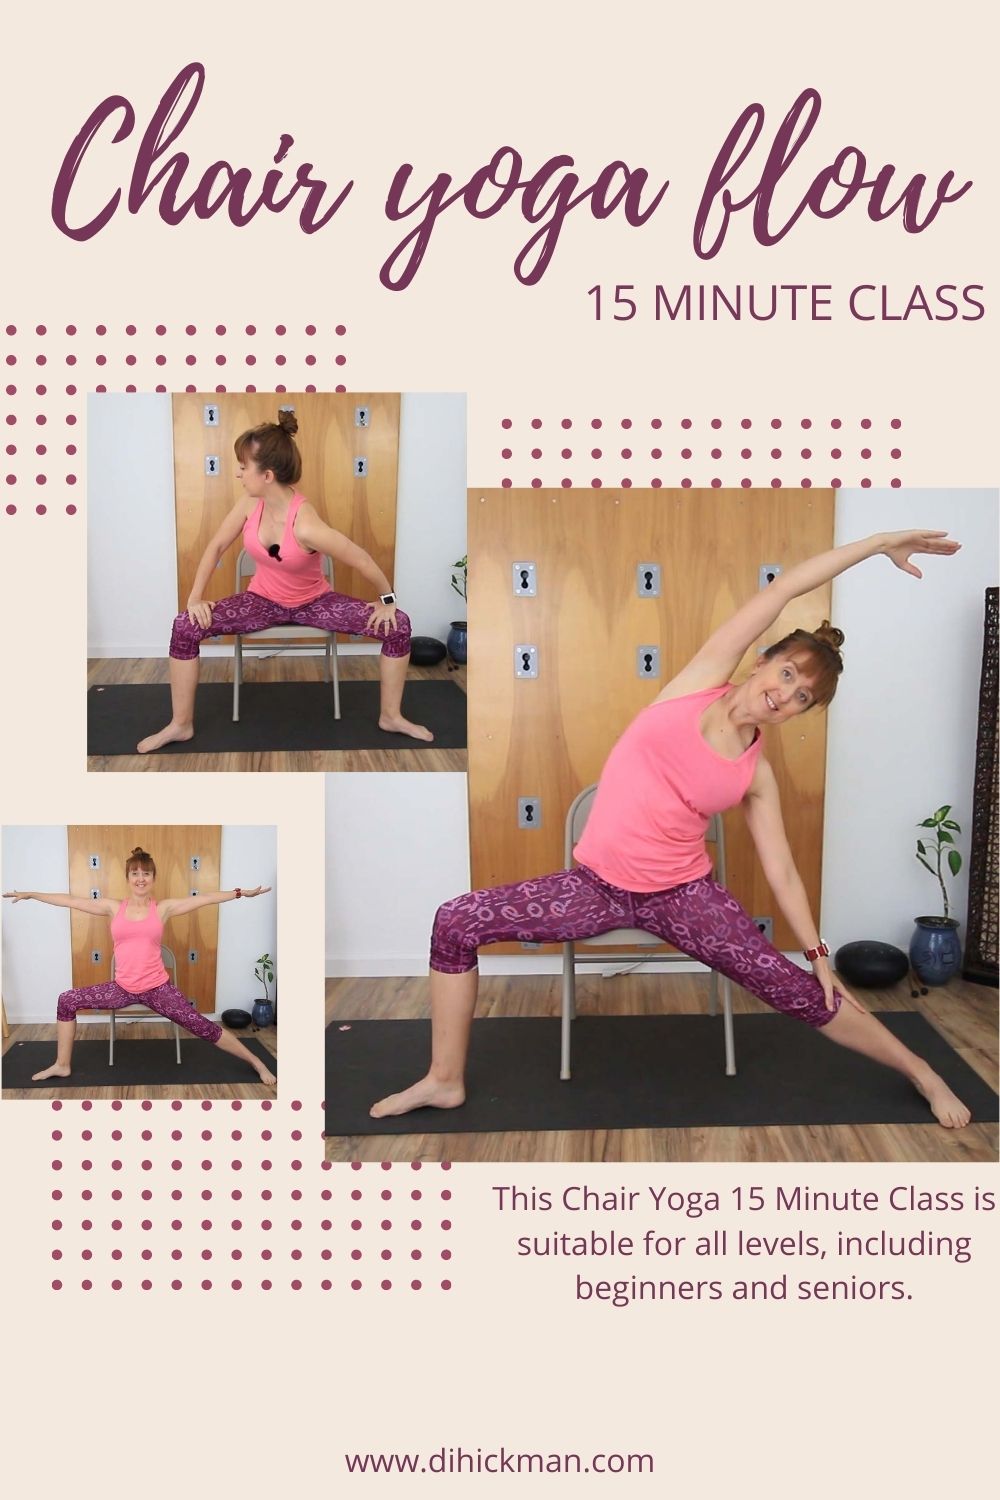 7 Chair Yoga Stretches: Gentle Seated Postures To Try At Home |  mindbodygreen